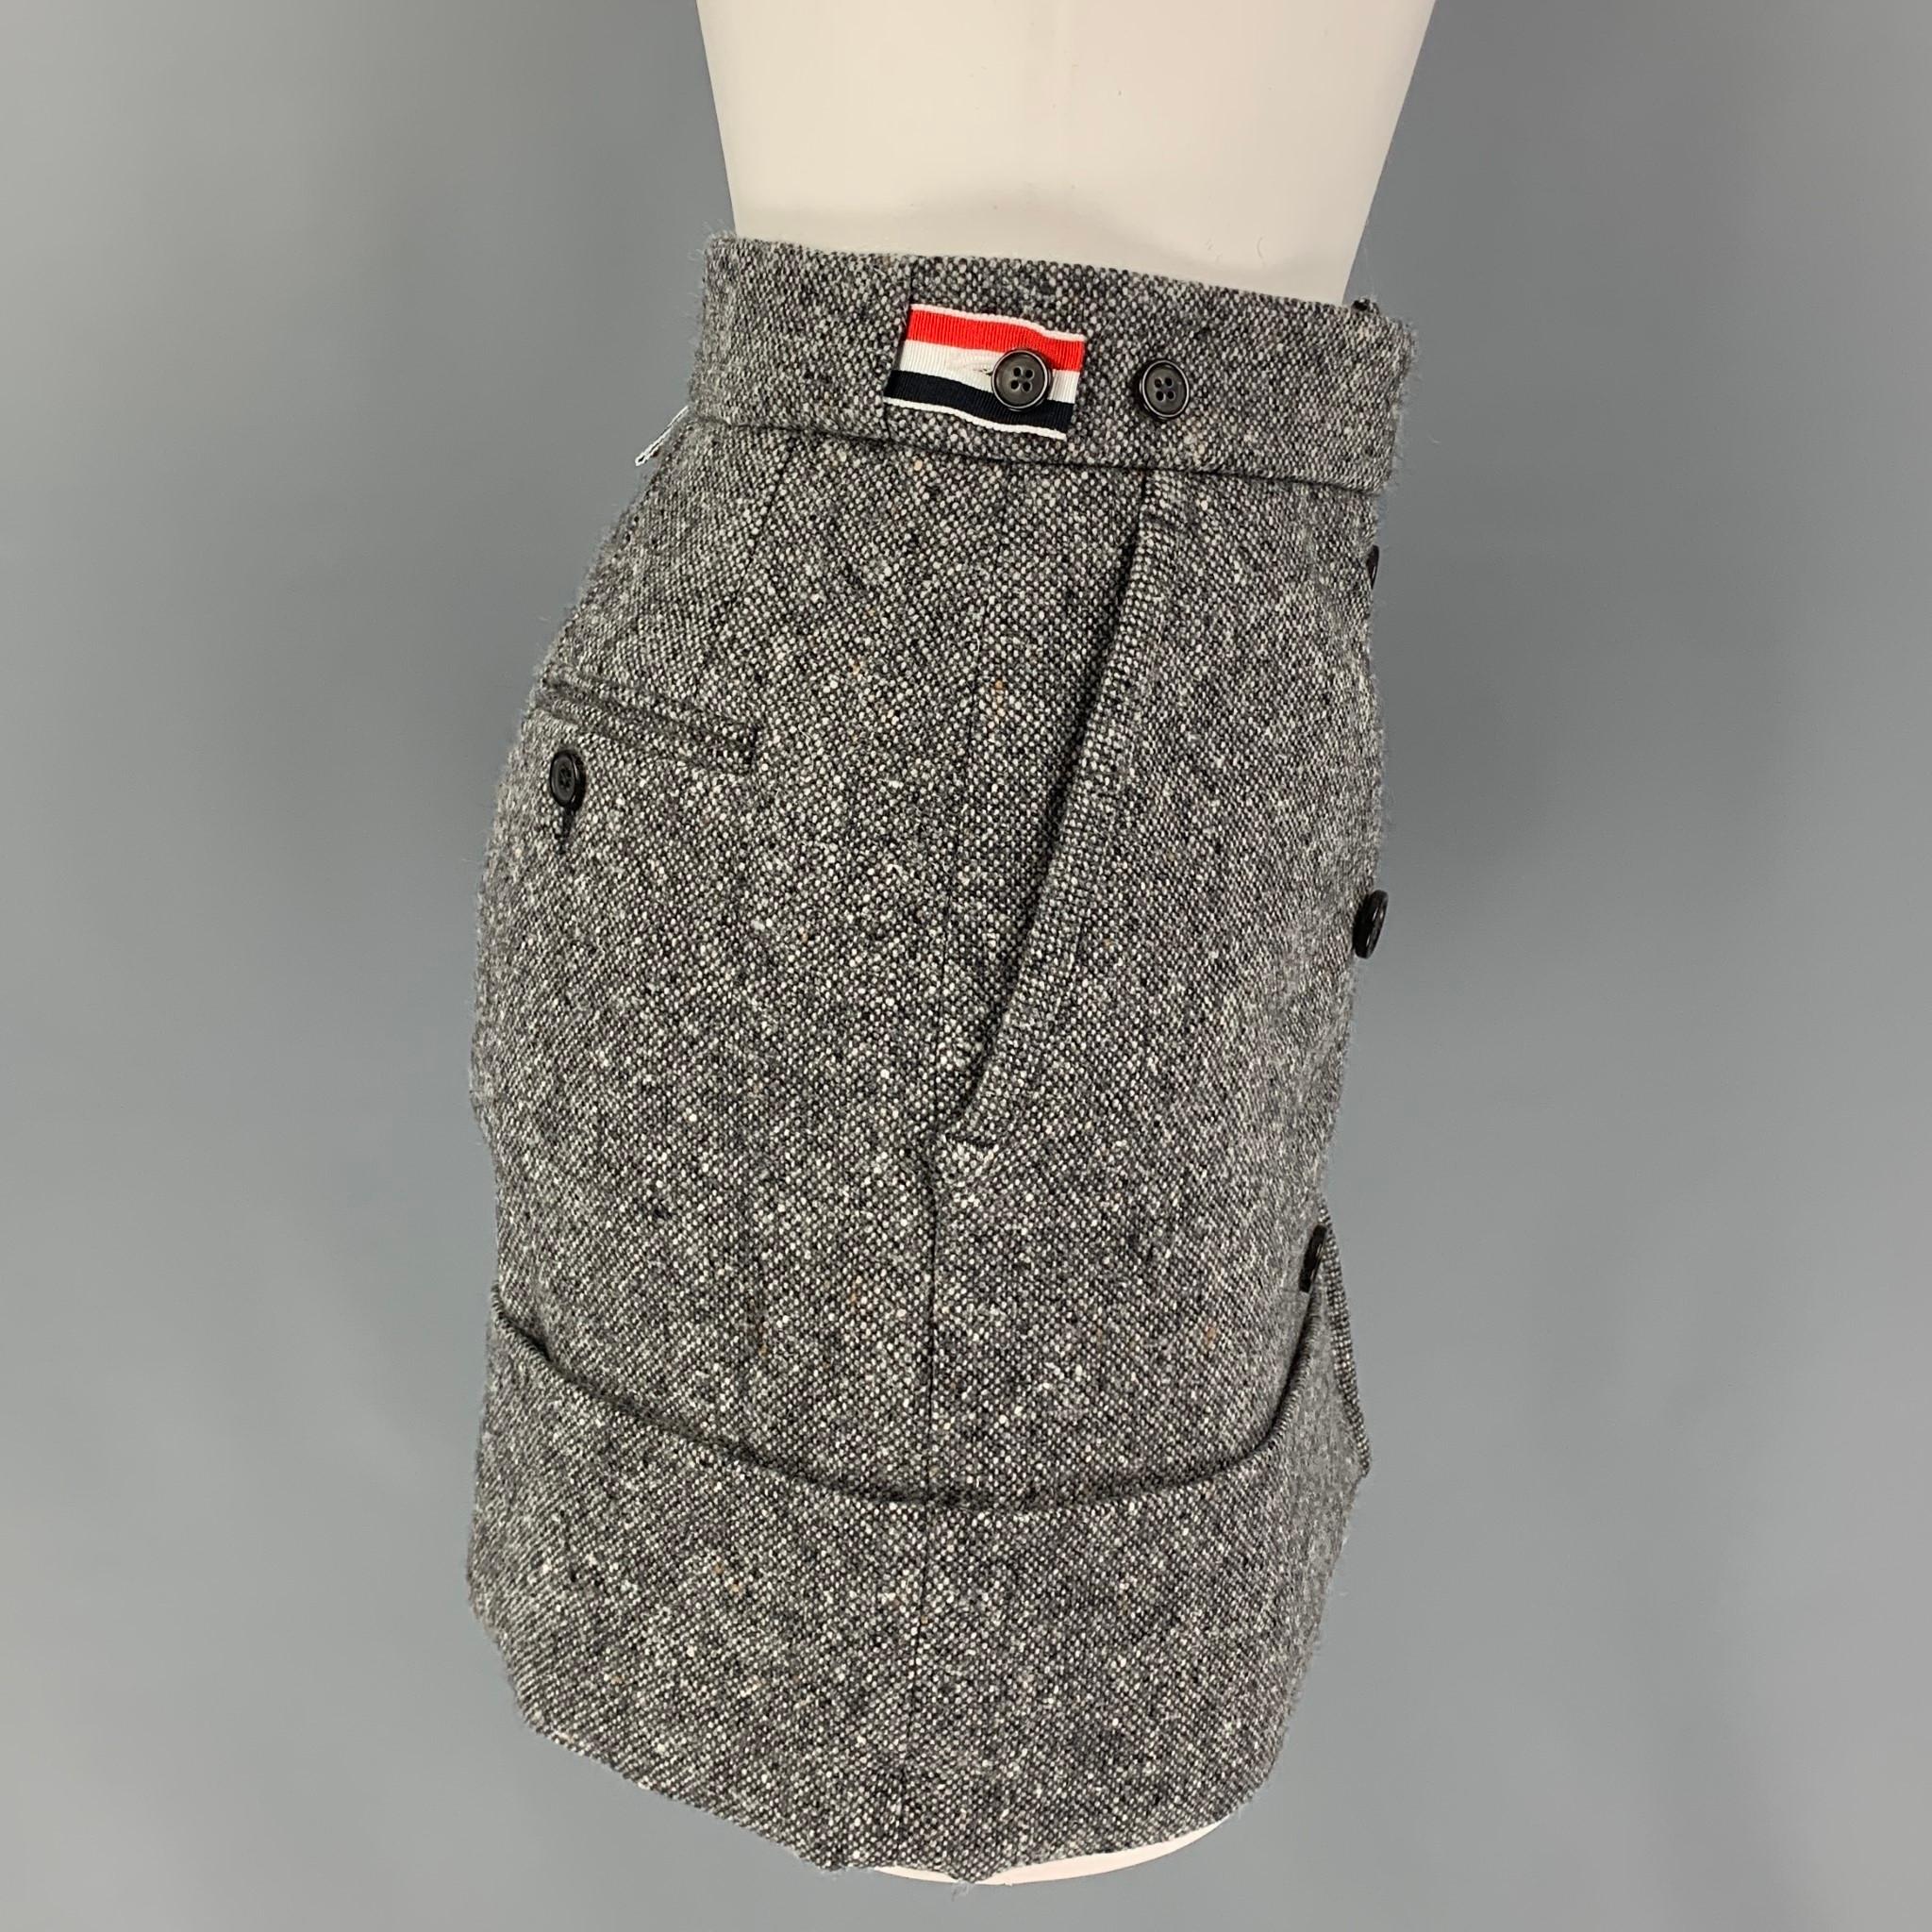 THOM BROWNE mini skirt comes in a grey mohair / merino wool featuring a cuffed hem, signature striped trim,  side tabs, back pockets, and a front double breasted closure. Made in Italy. 

Excellent Pre-Owned Condition.
Marked: 36
Original Retail